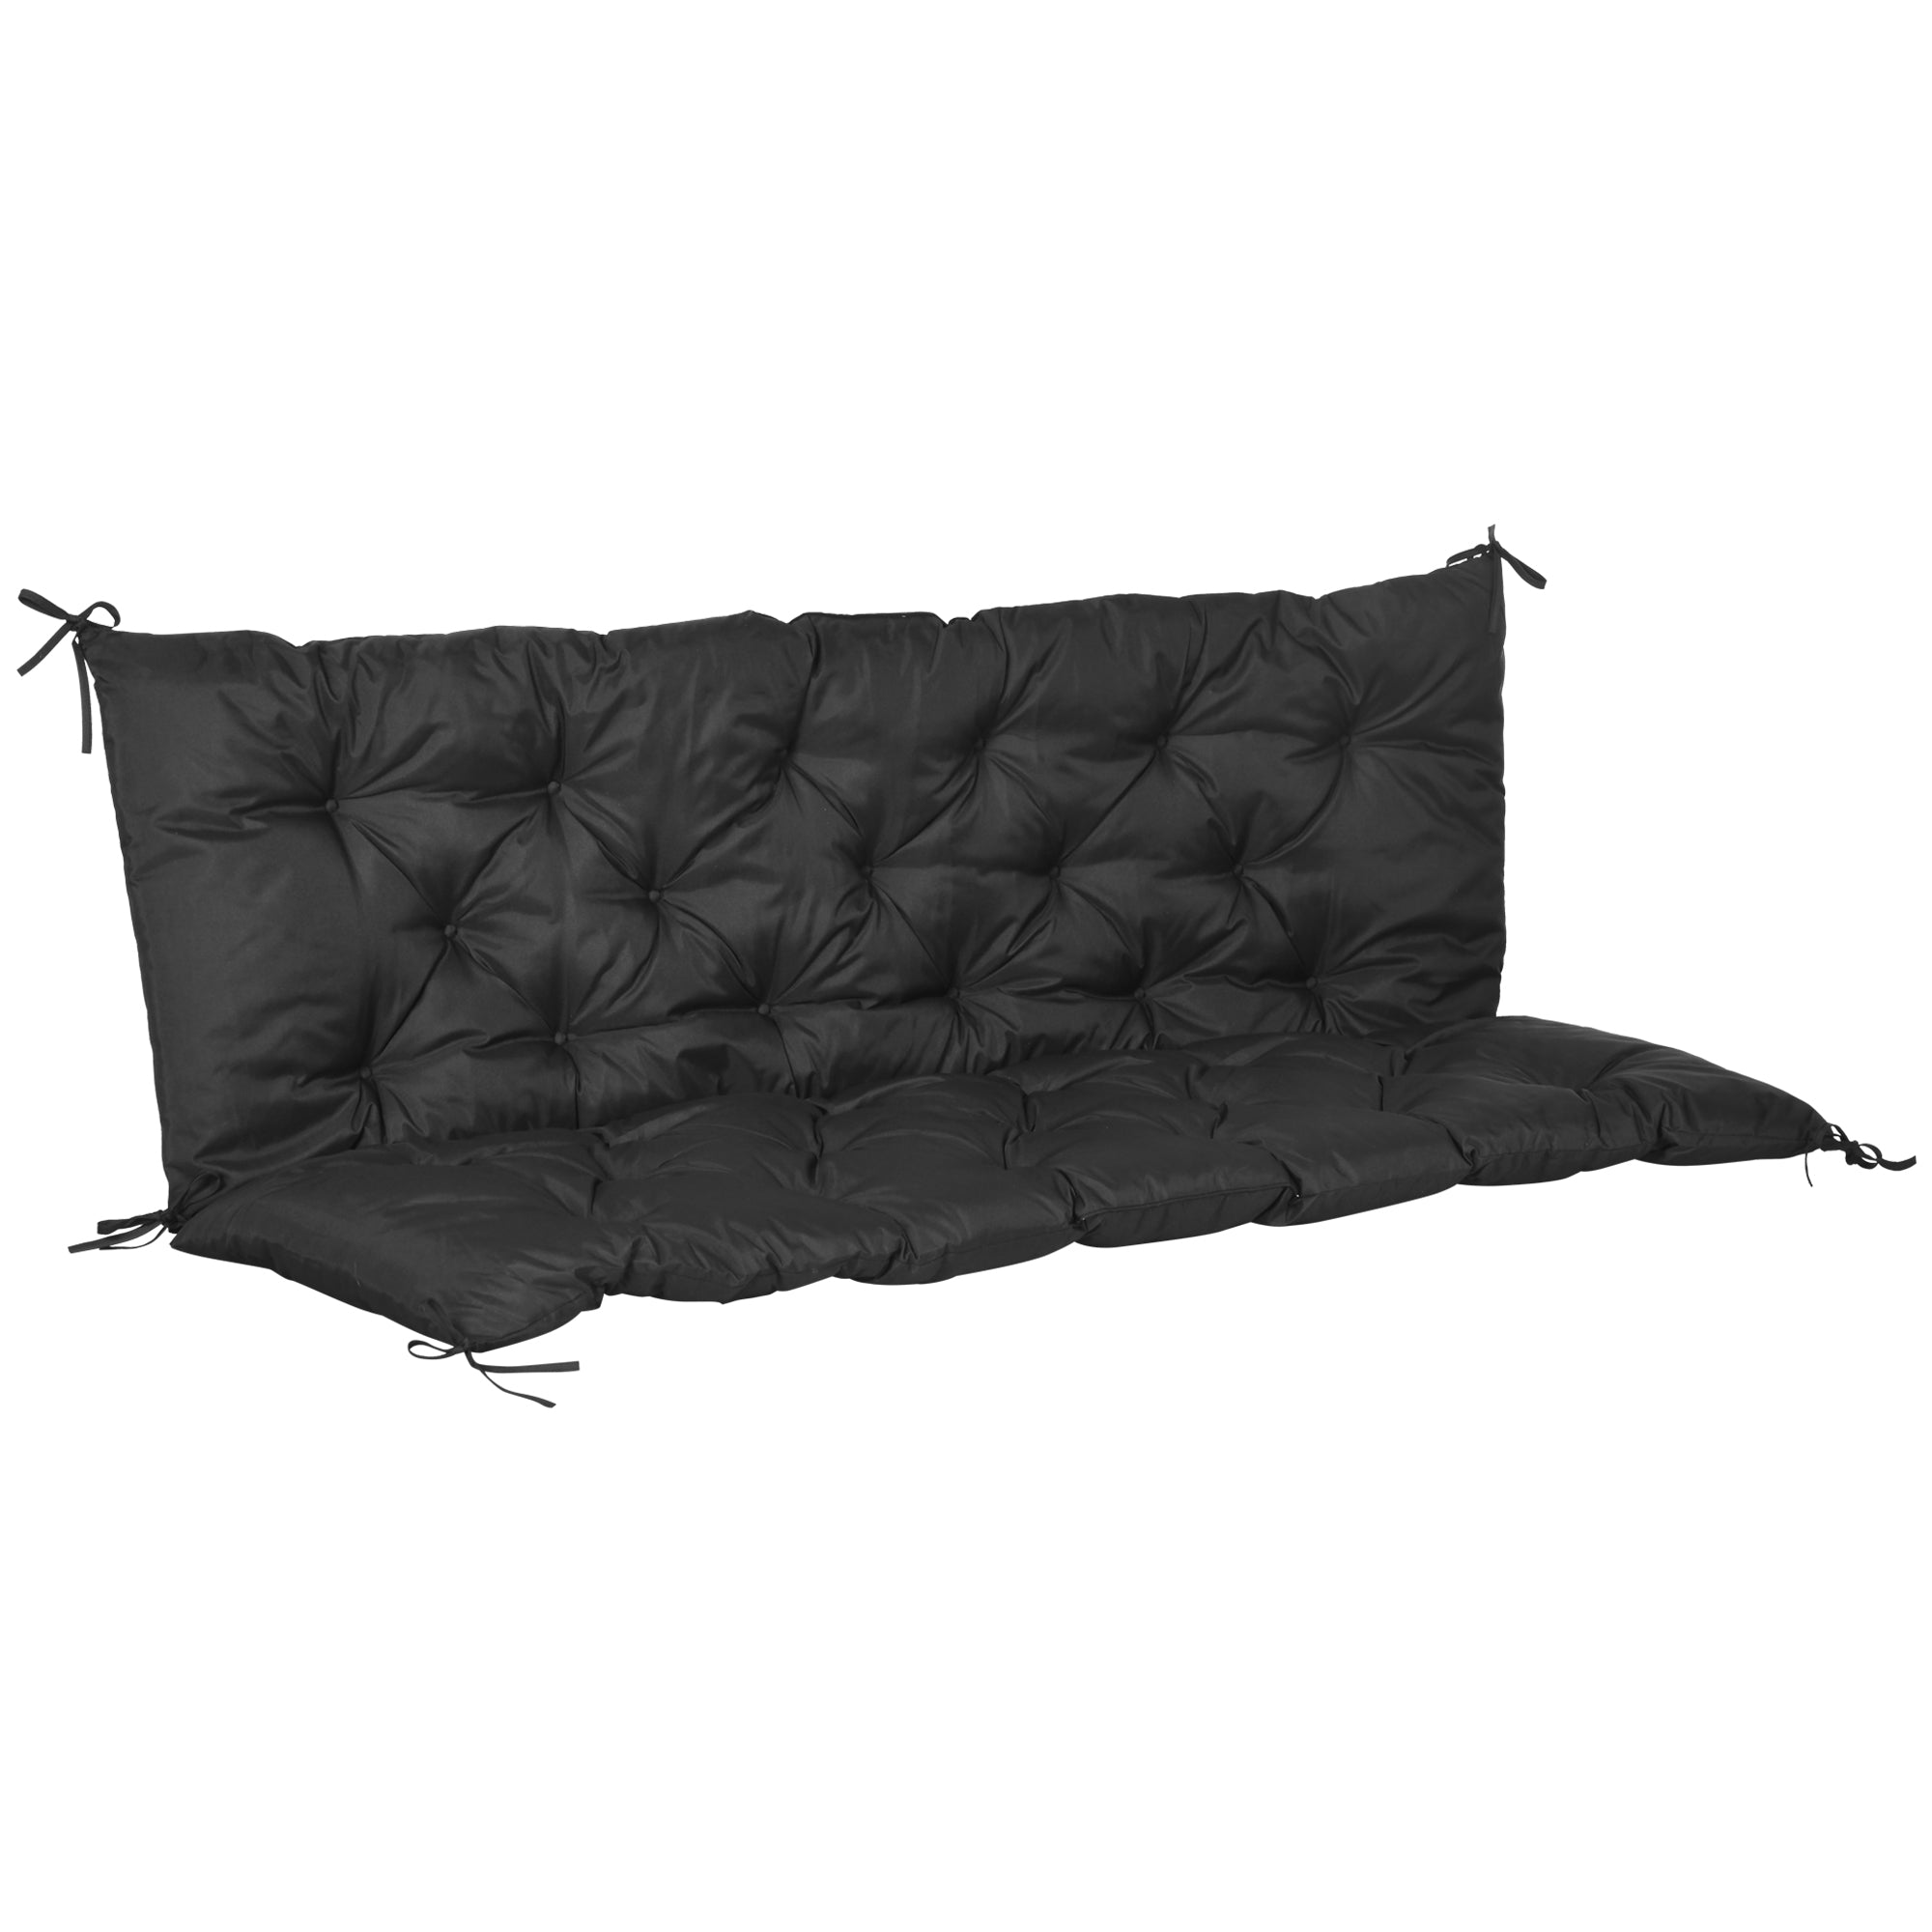 Outsunny 3 Seater Garden Bench Cushion Outdoor Seat Pad with Ties Black  | TJ Hughes